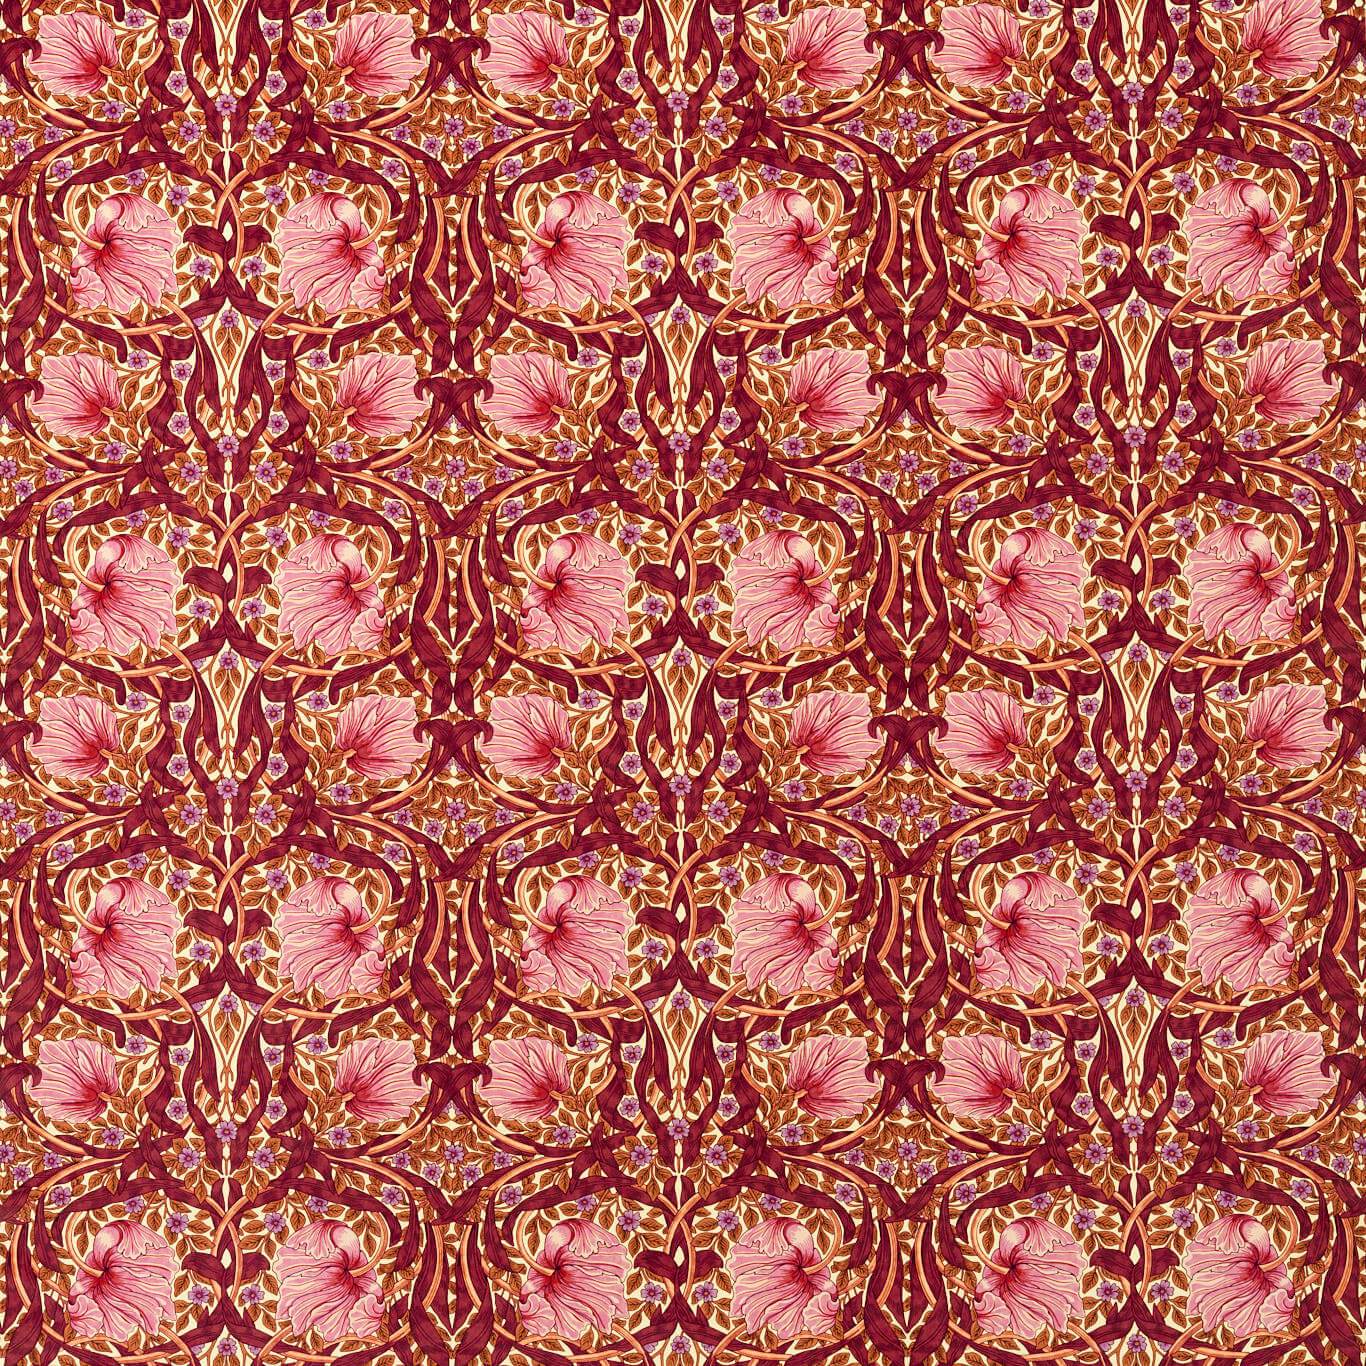 Pimpernel Sunset Boulevard Fabric By Morris & Co